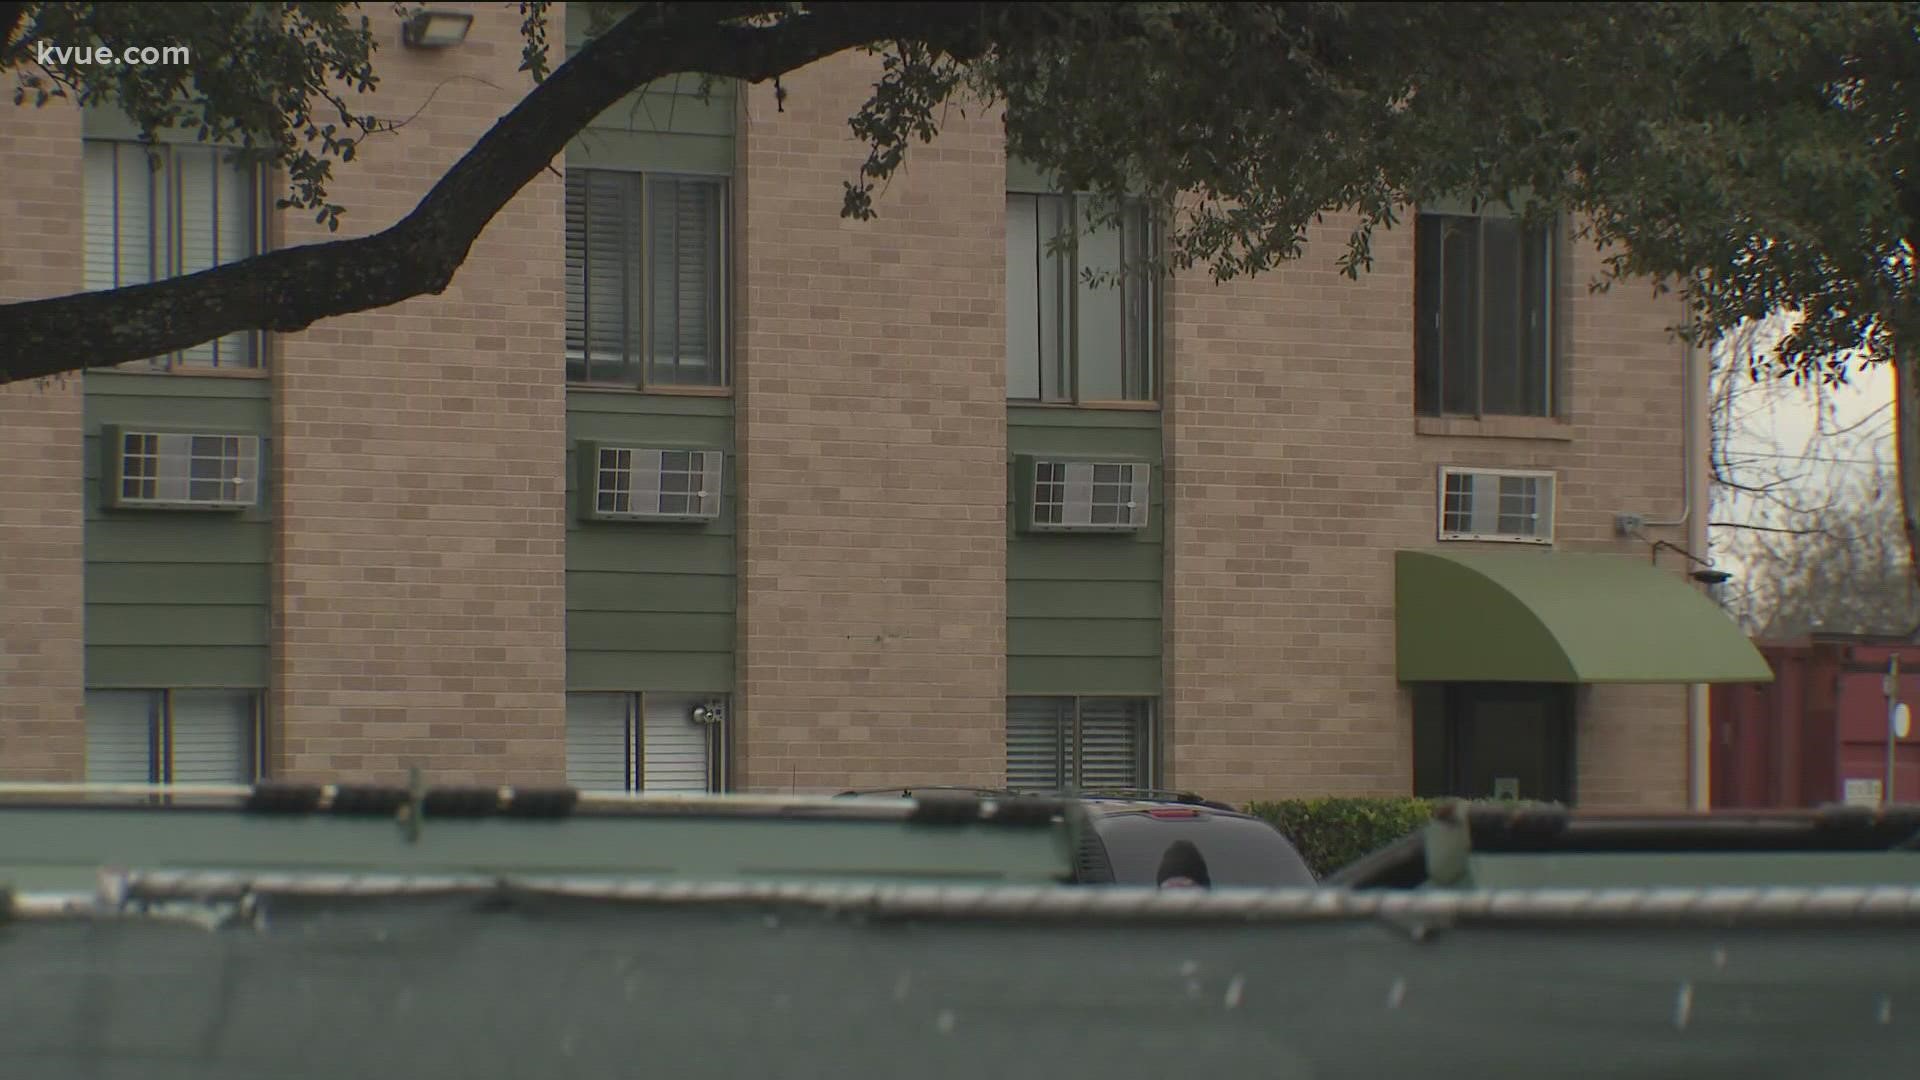 City of Austin officials say they're making progress to get people off the streets and into housing.